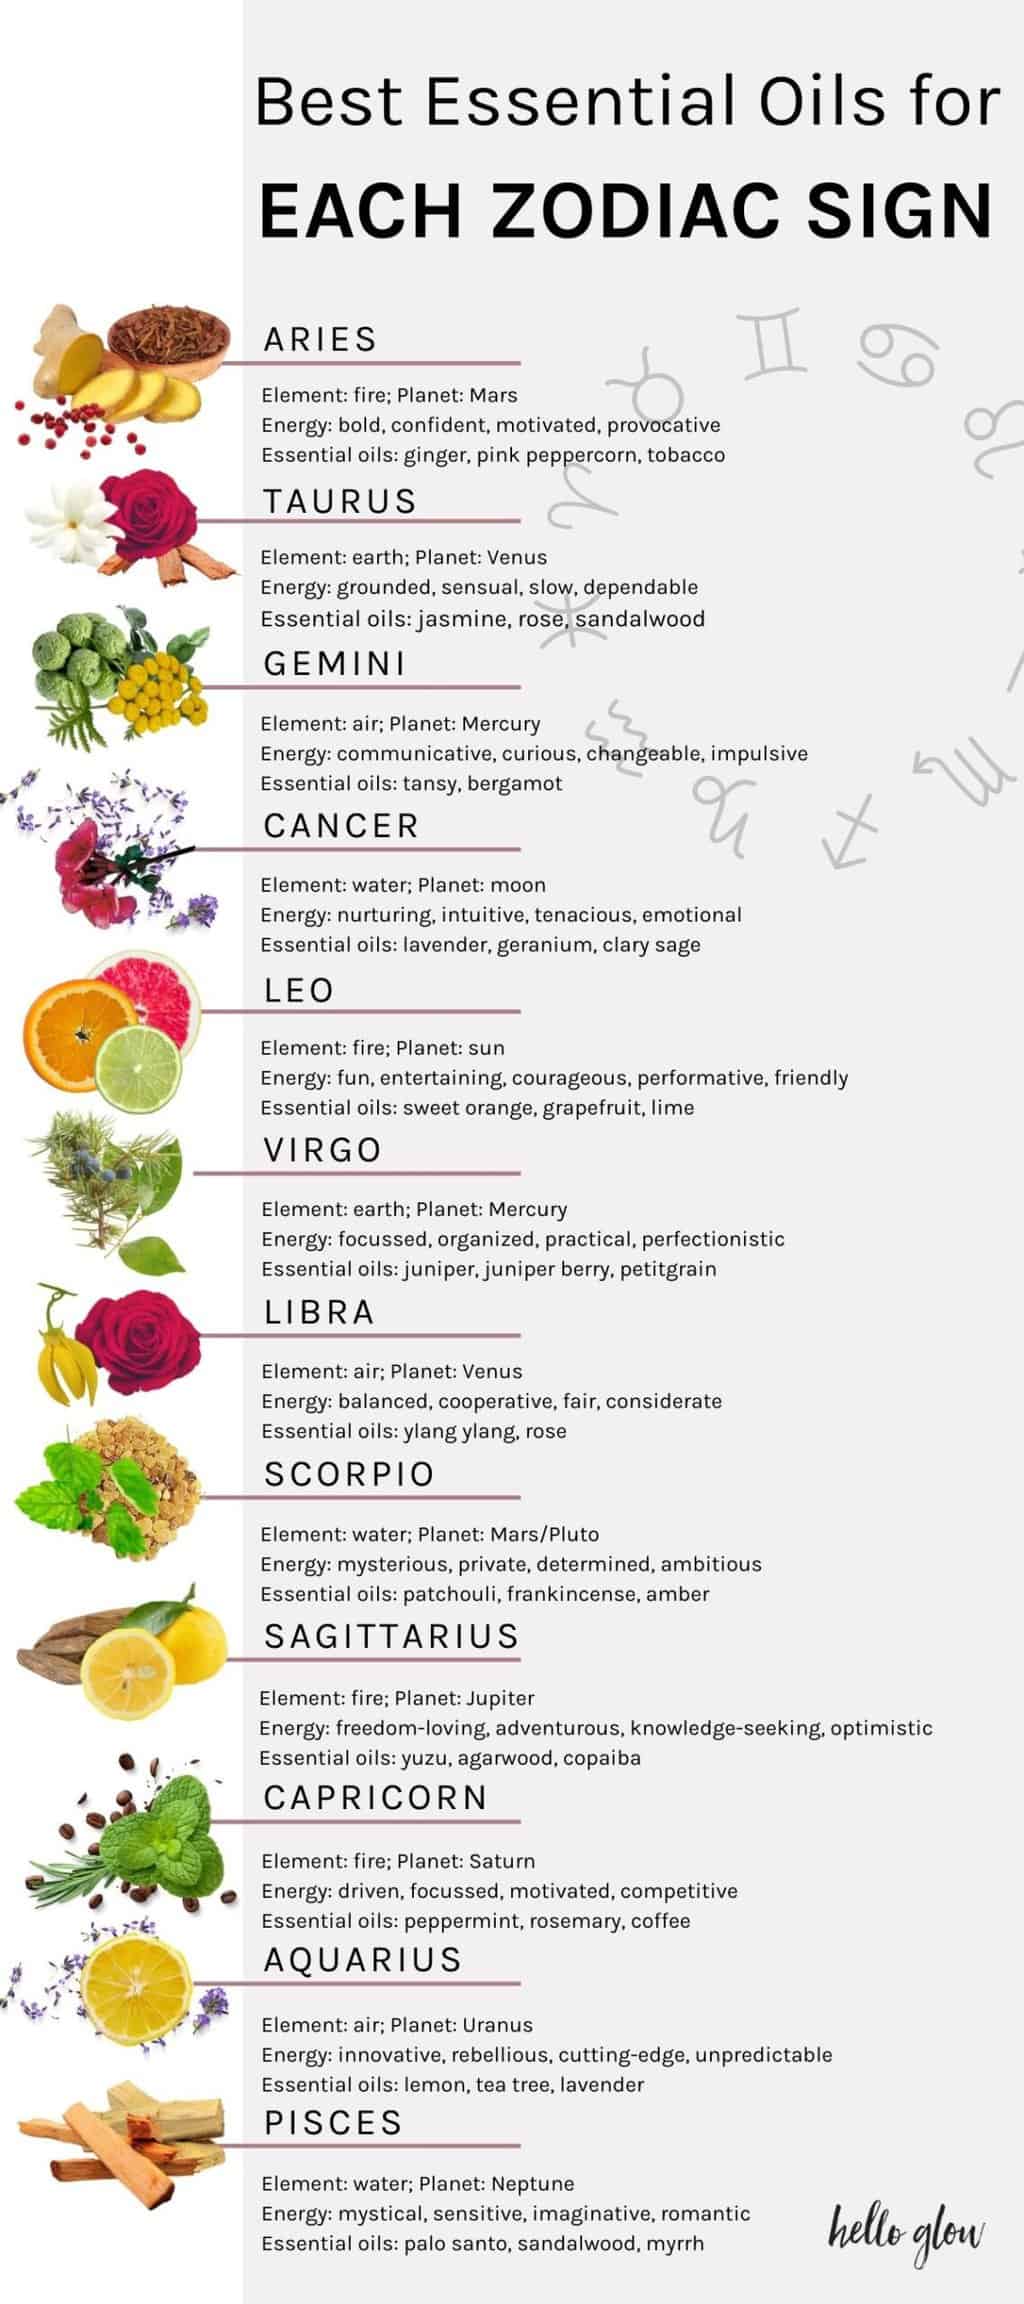 Essential Oils for the Zodiac Signs